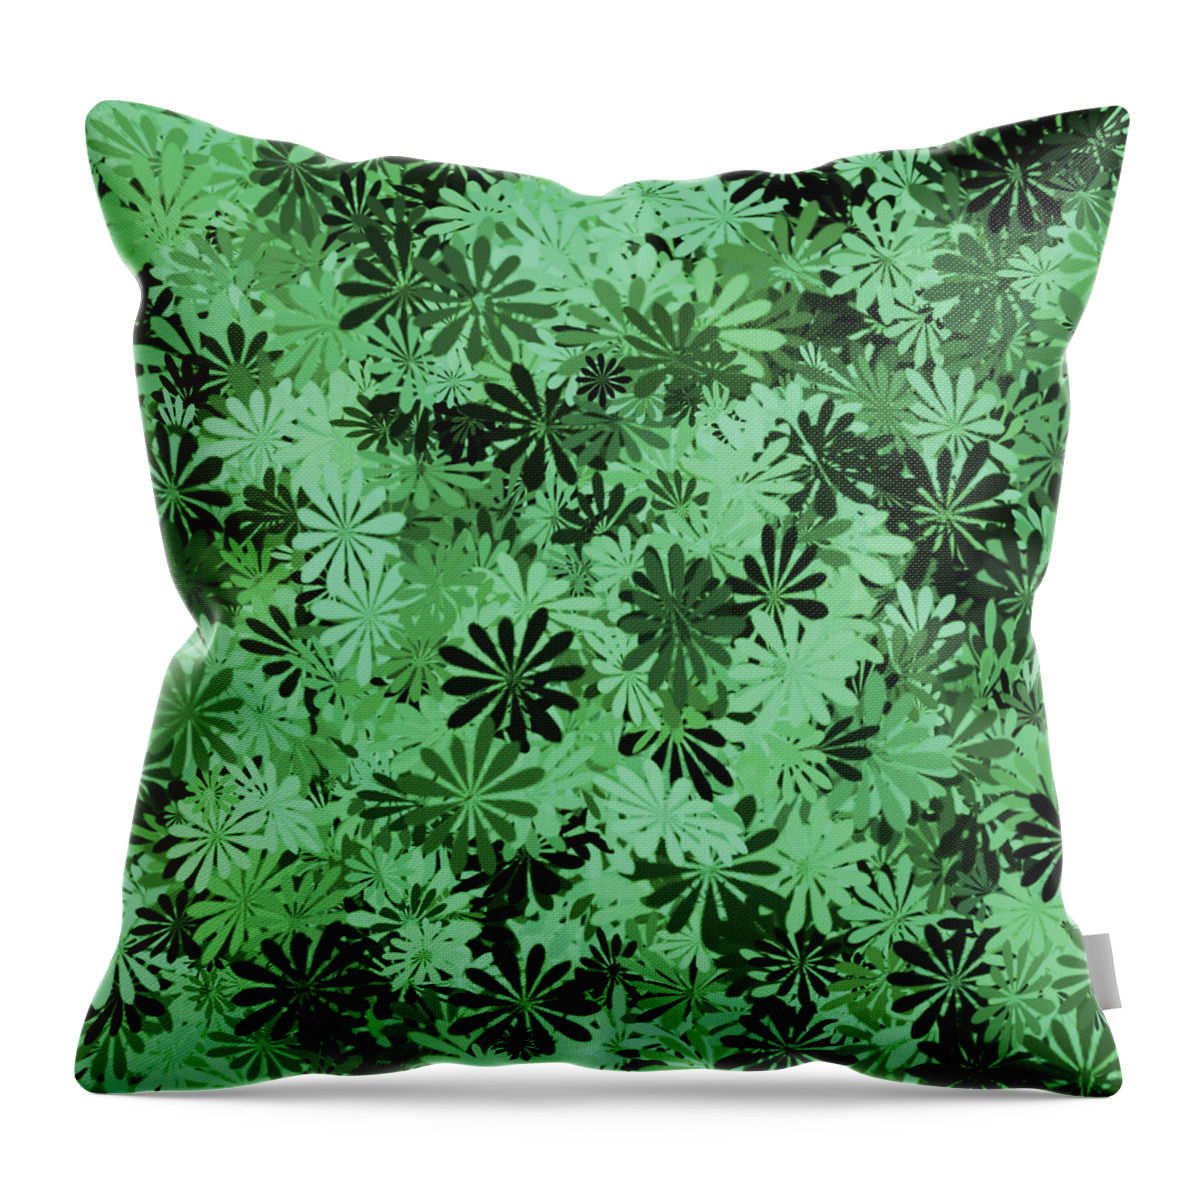 Flower Throw Pillow featuring the digital art Pale Green Floral Pattern by Aimee L Maher ALM GALLERY